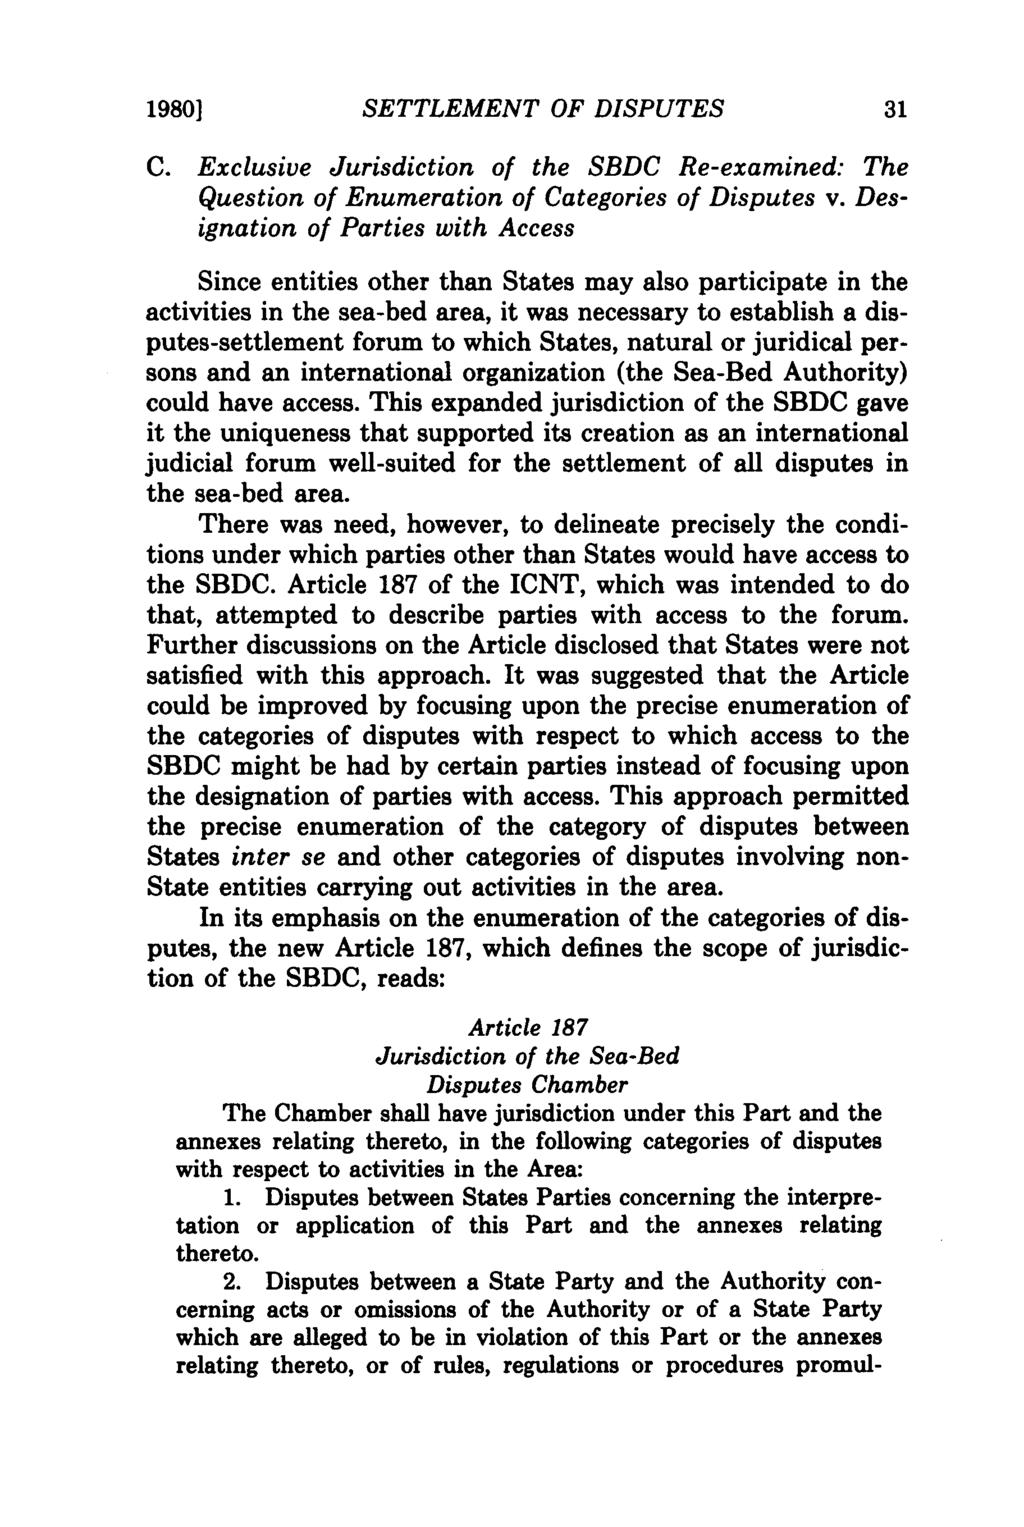 19801 SETTLEMENT OF DISPUTES C. Exclusive Jurisdiction of the SBDC Re-examined: The Question of Enumeration of Categories of Disputes v.